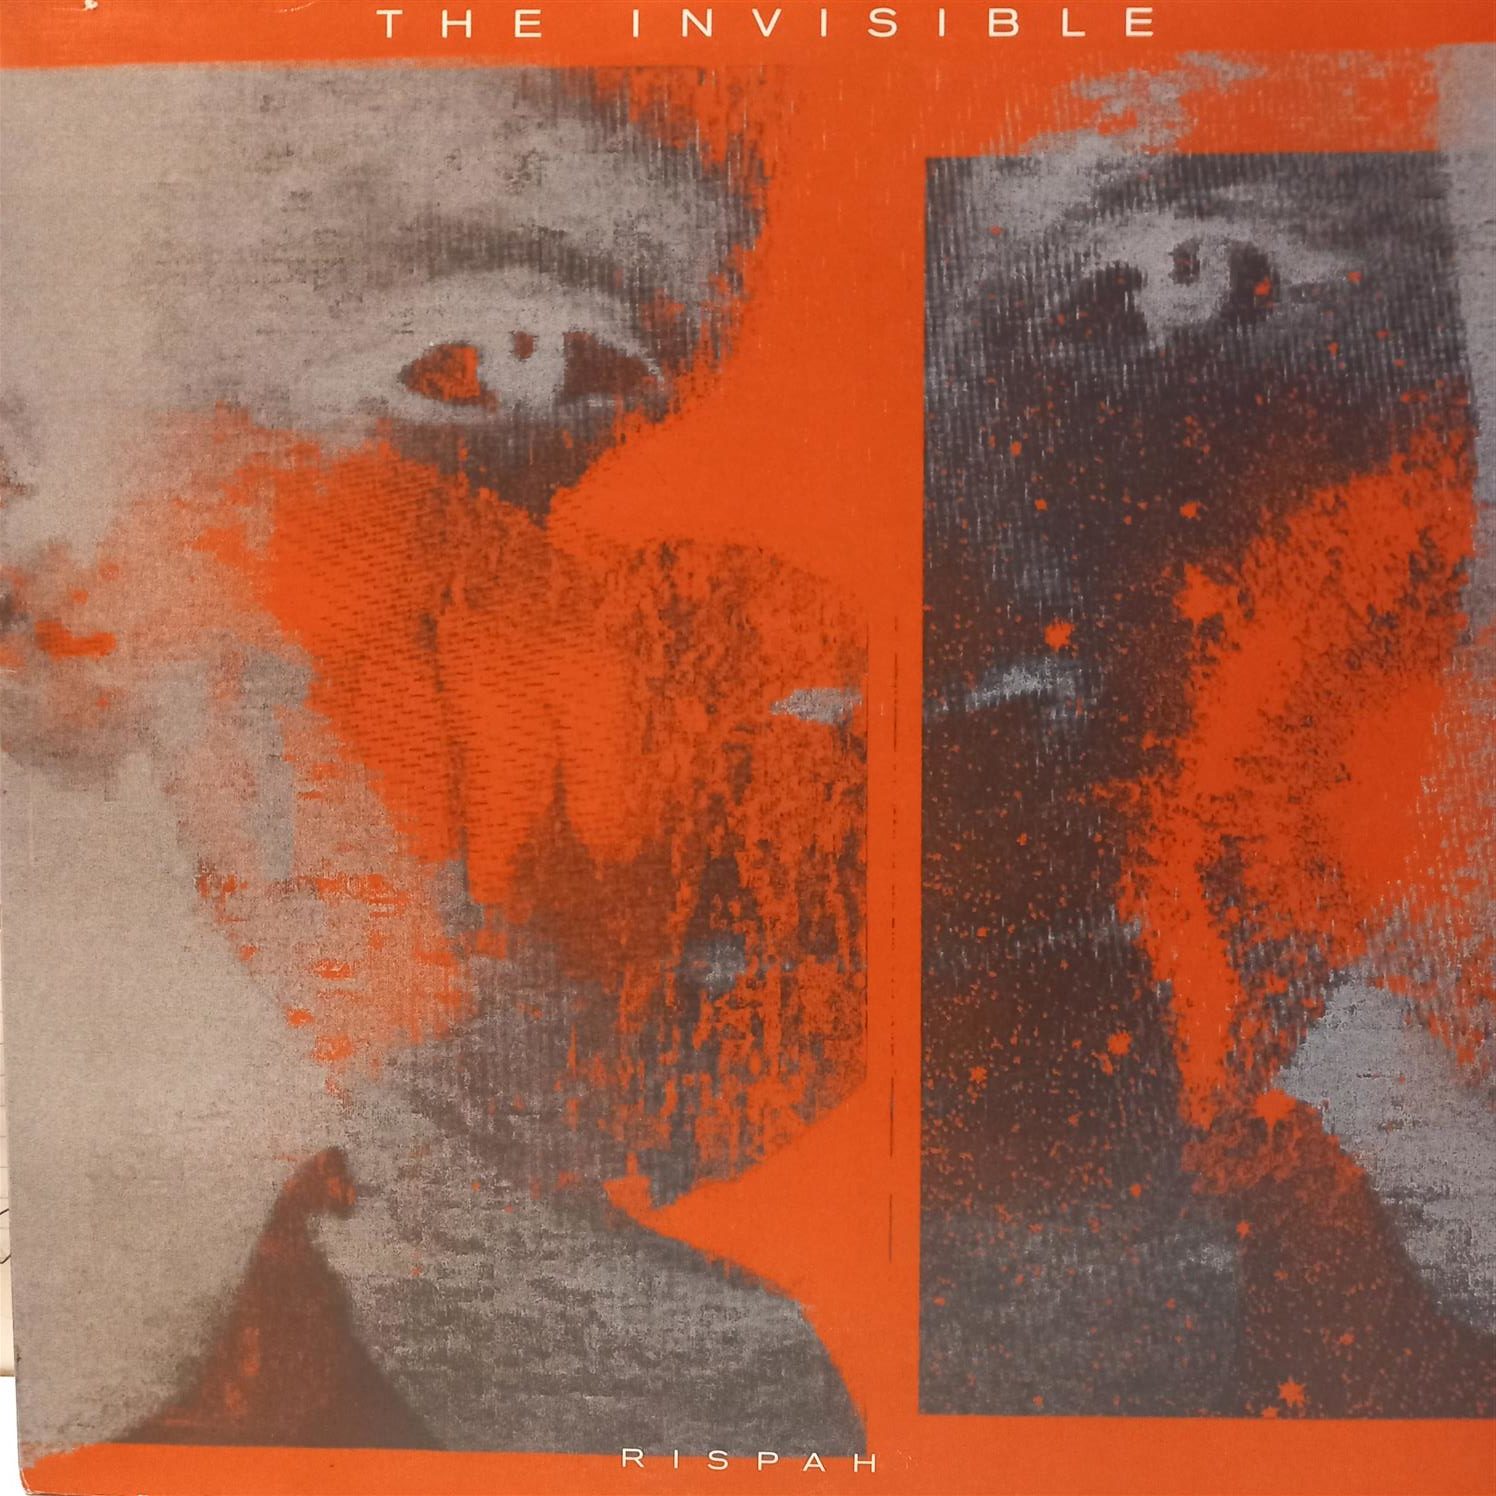 THE INVISIBLE – RISPAH ON